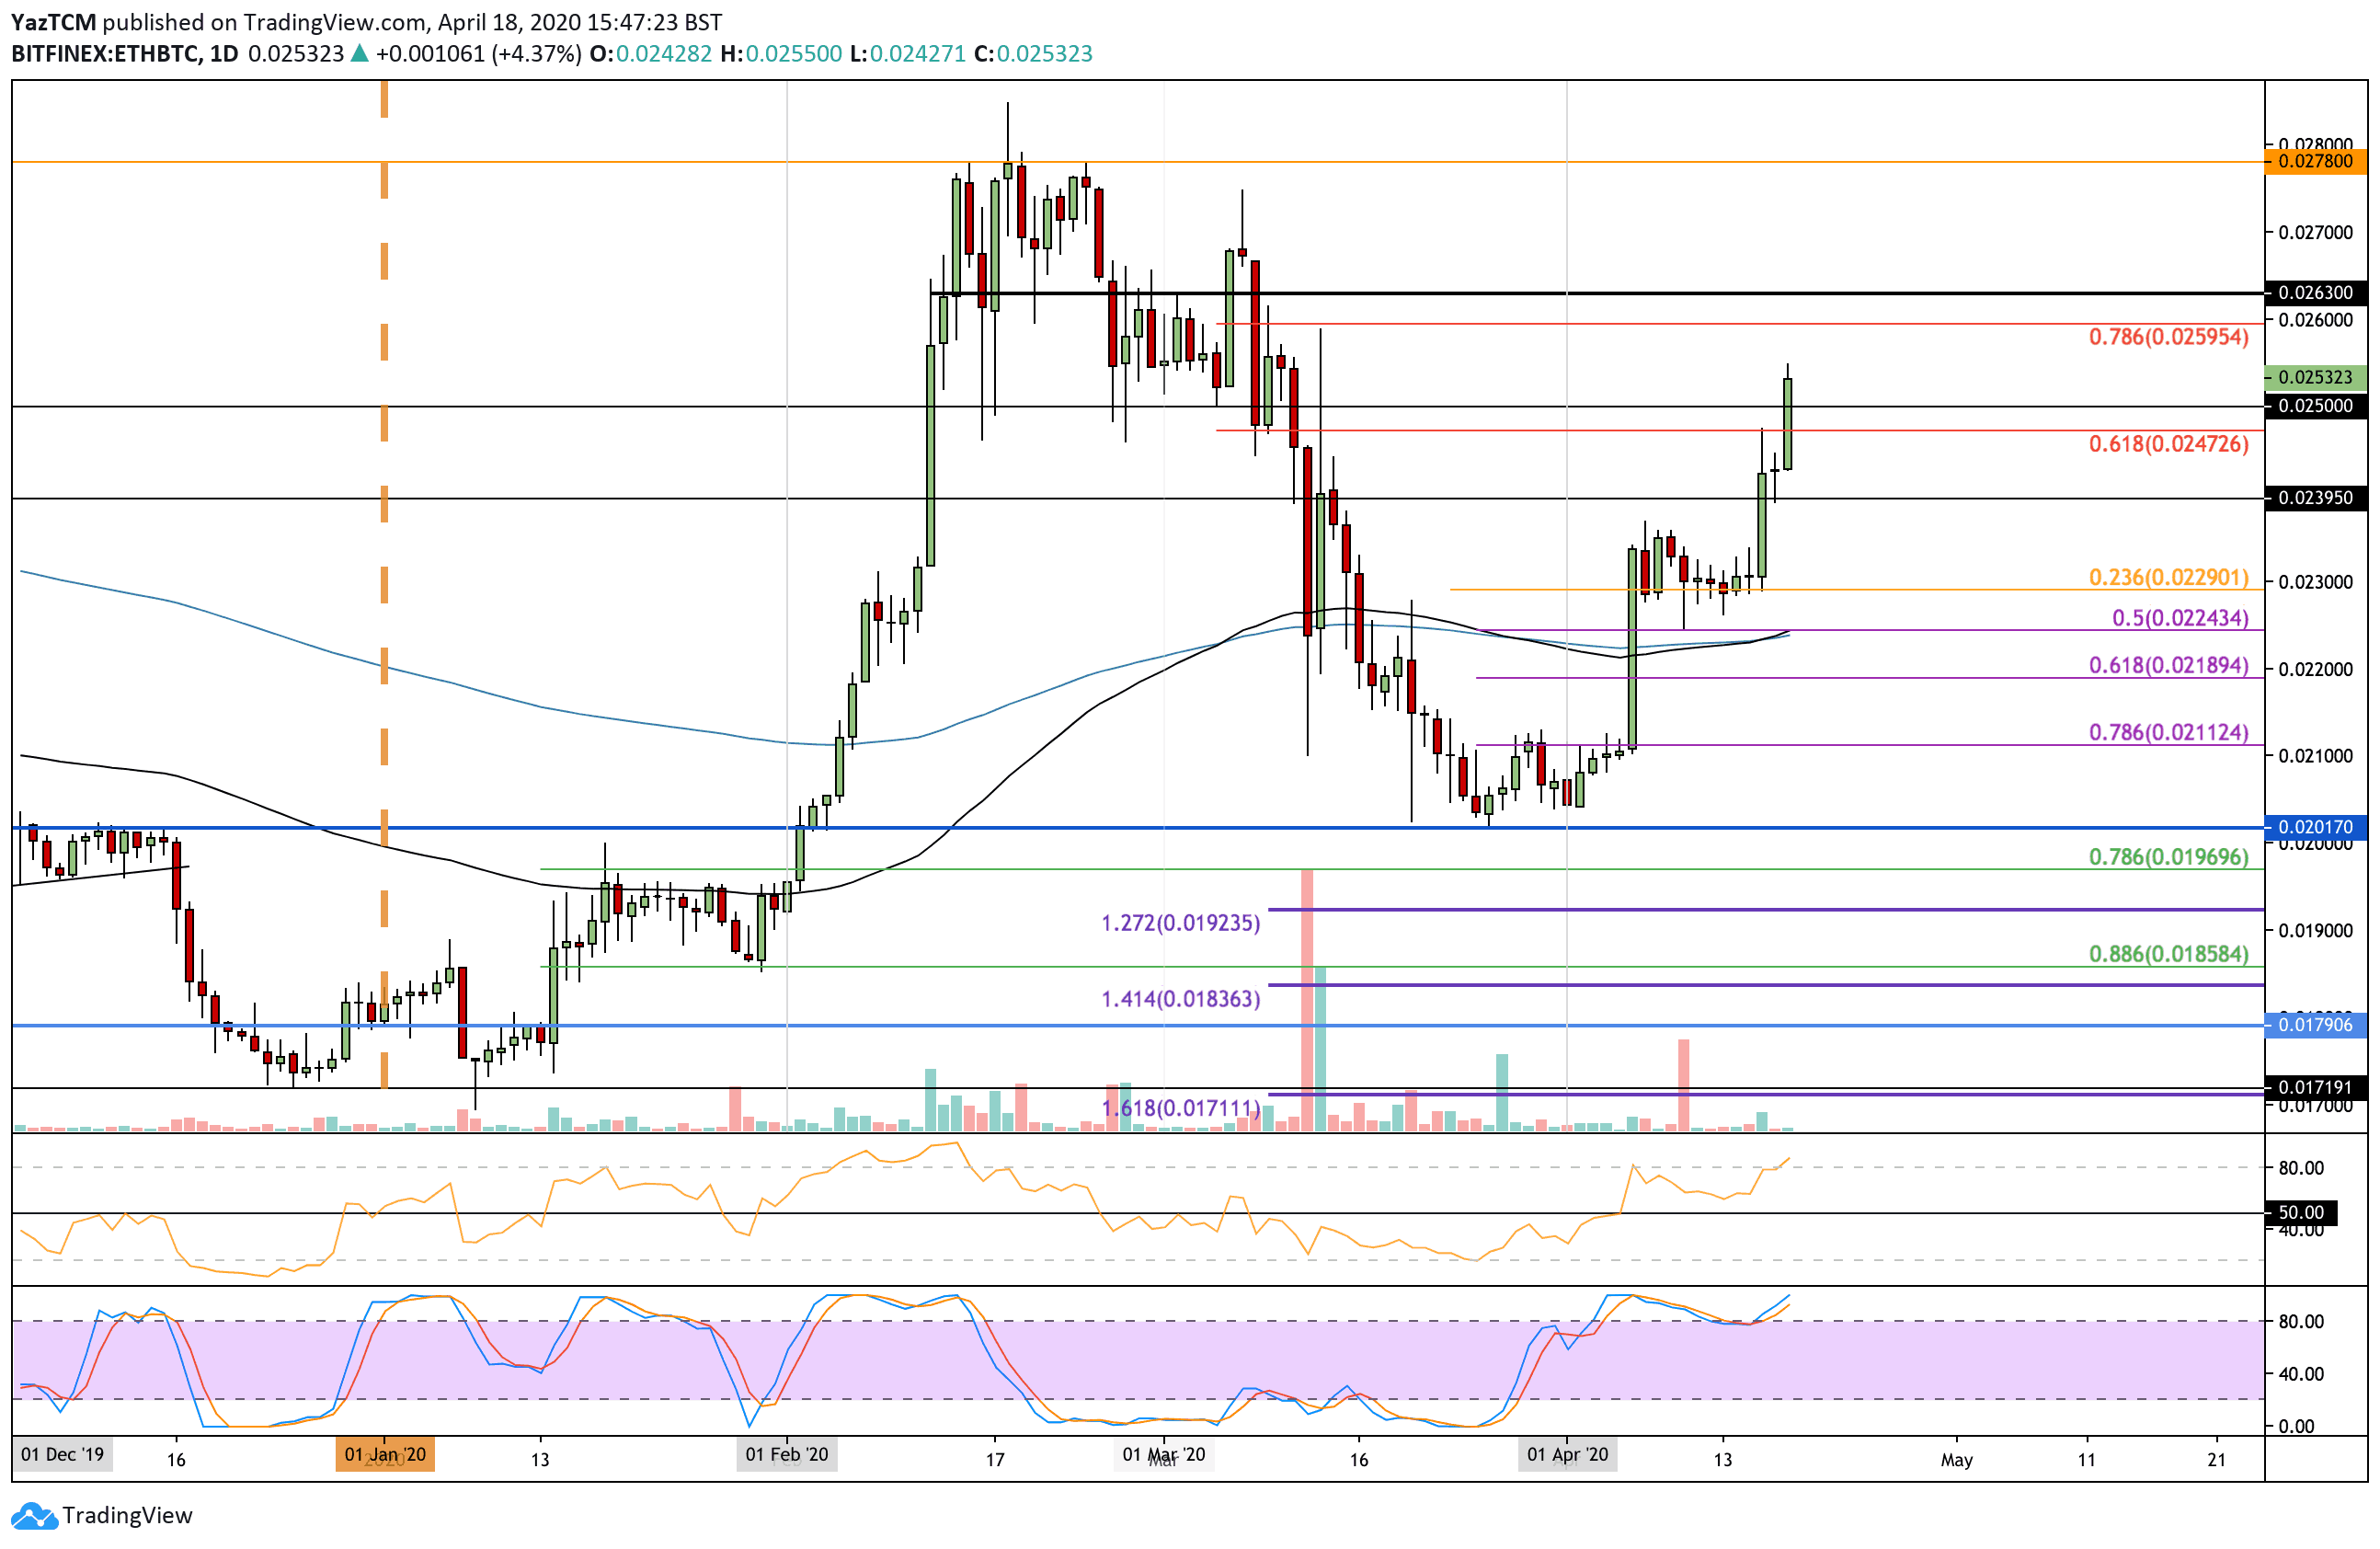 Ethereum Price Analysis: ETH Reaches April 2020 Highs, Is $200 Incoming?